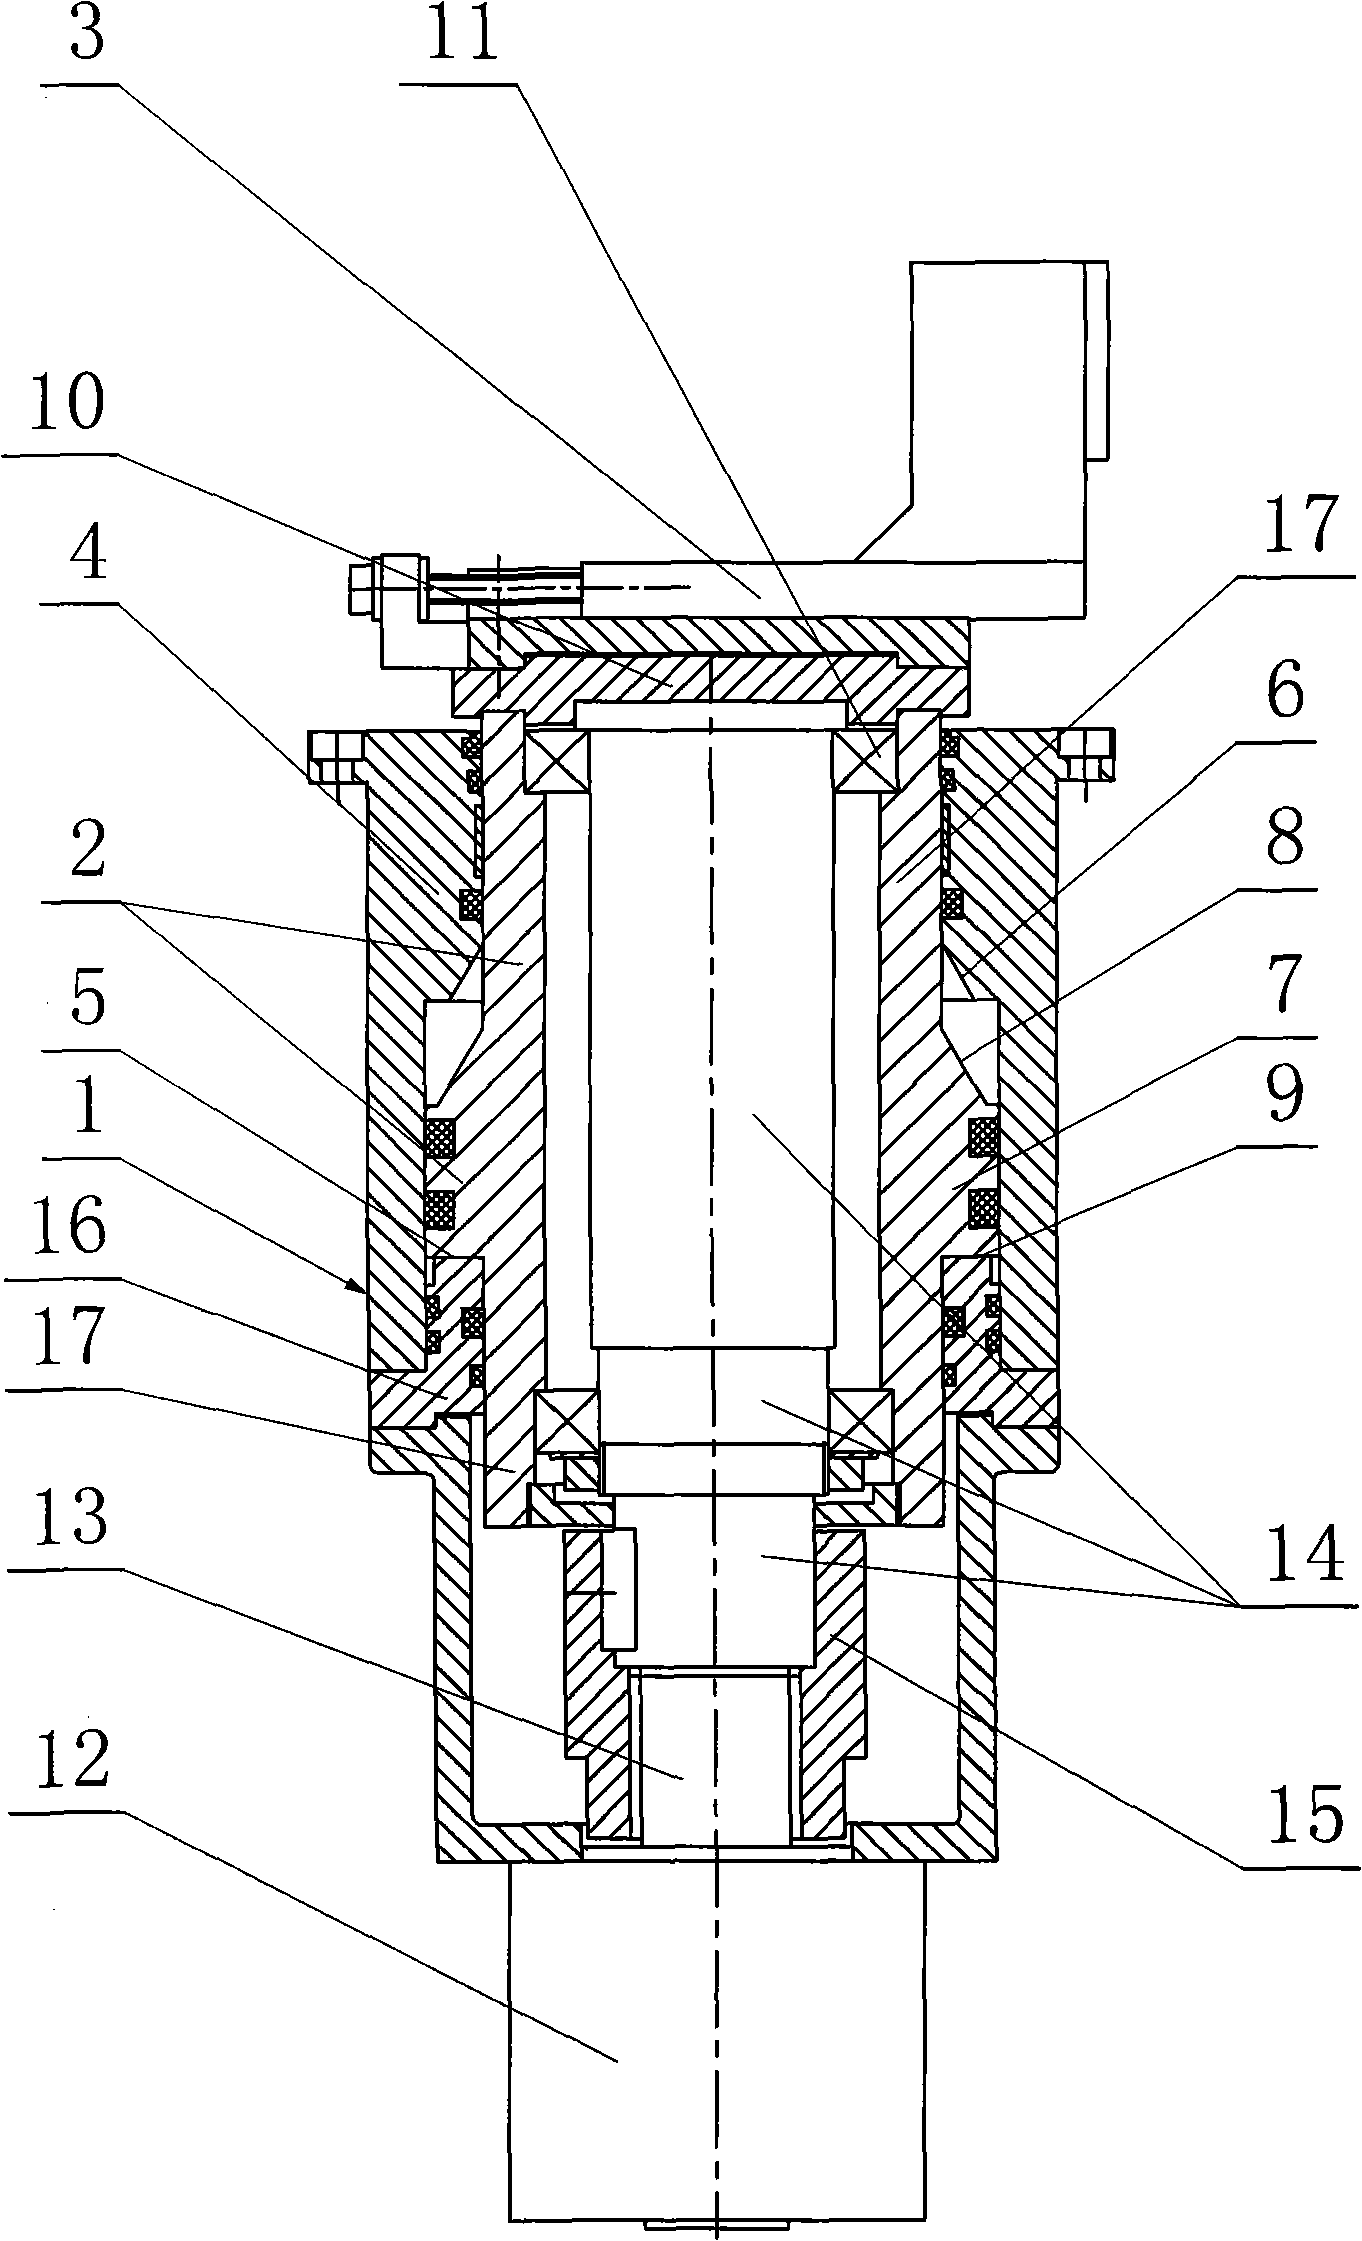 Cutter mechanism of machine tool used for turning spherical workpieces